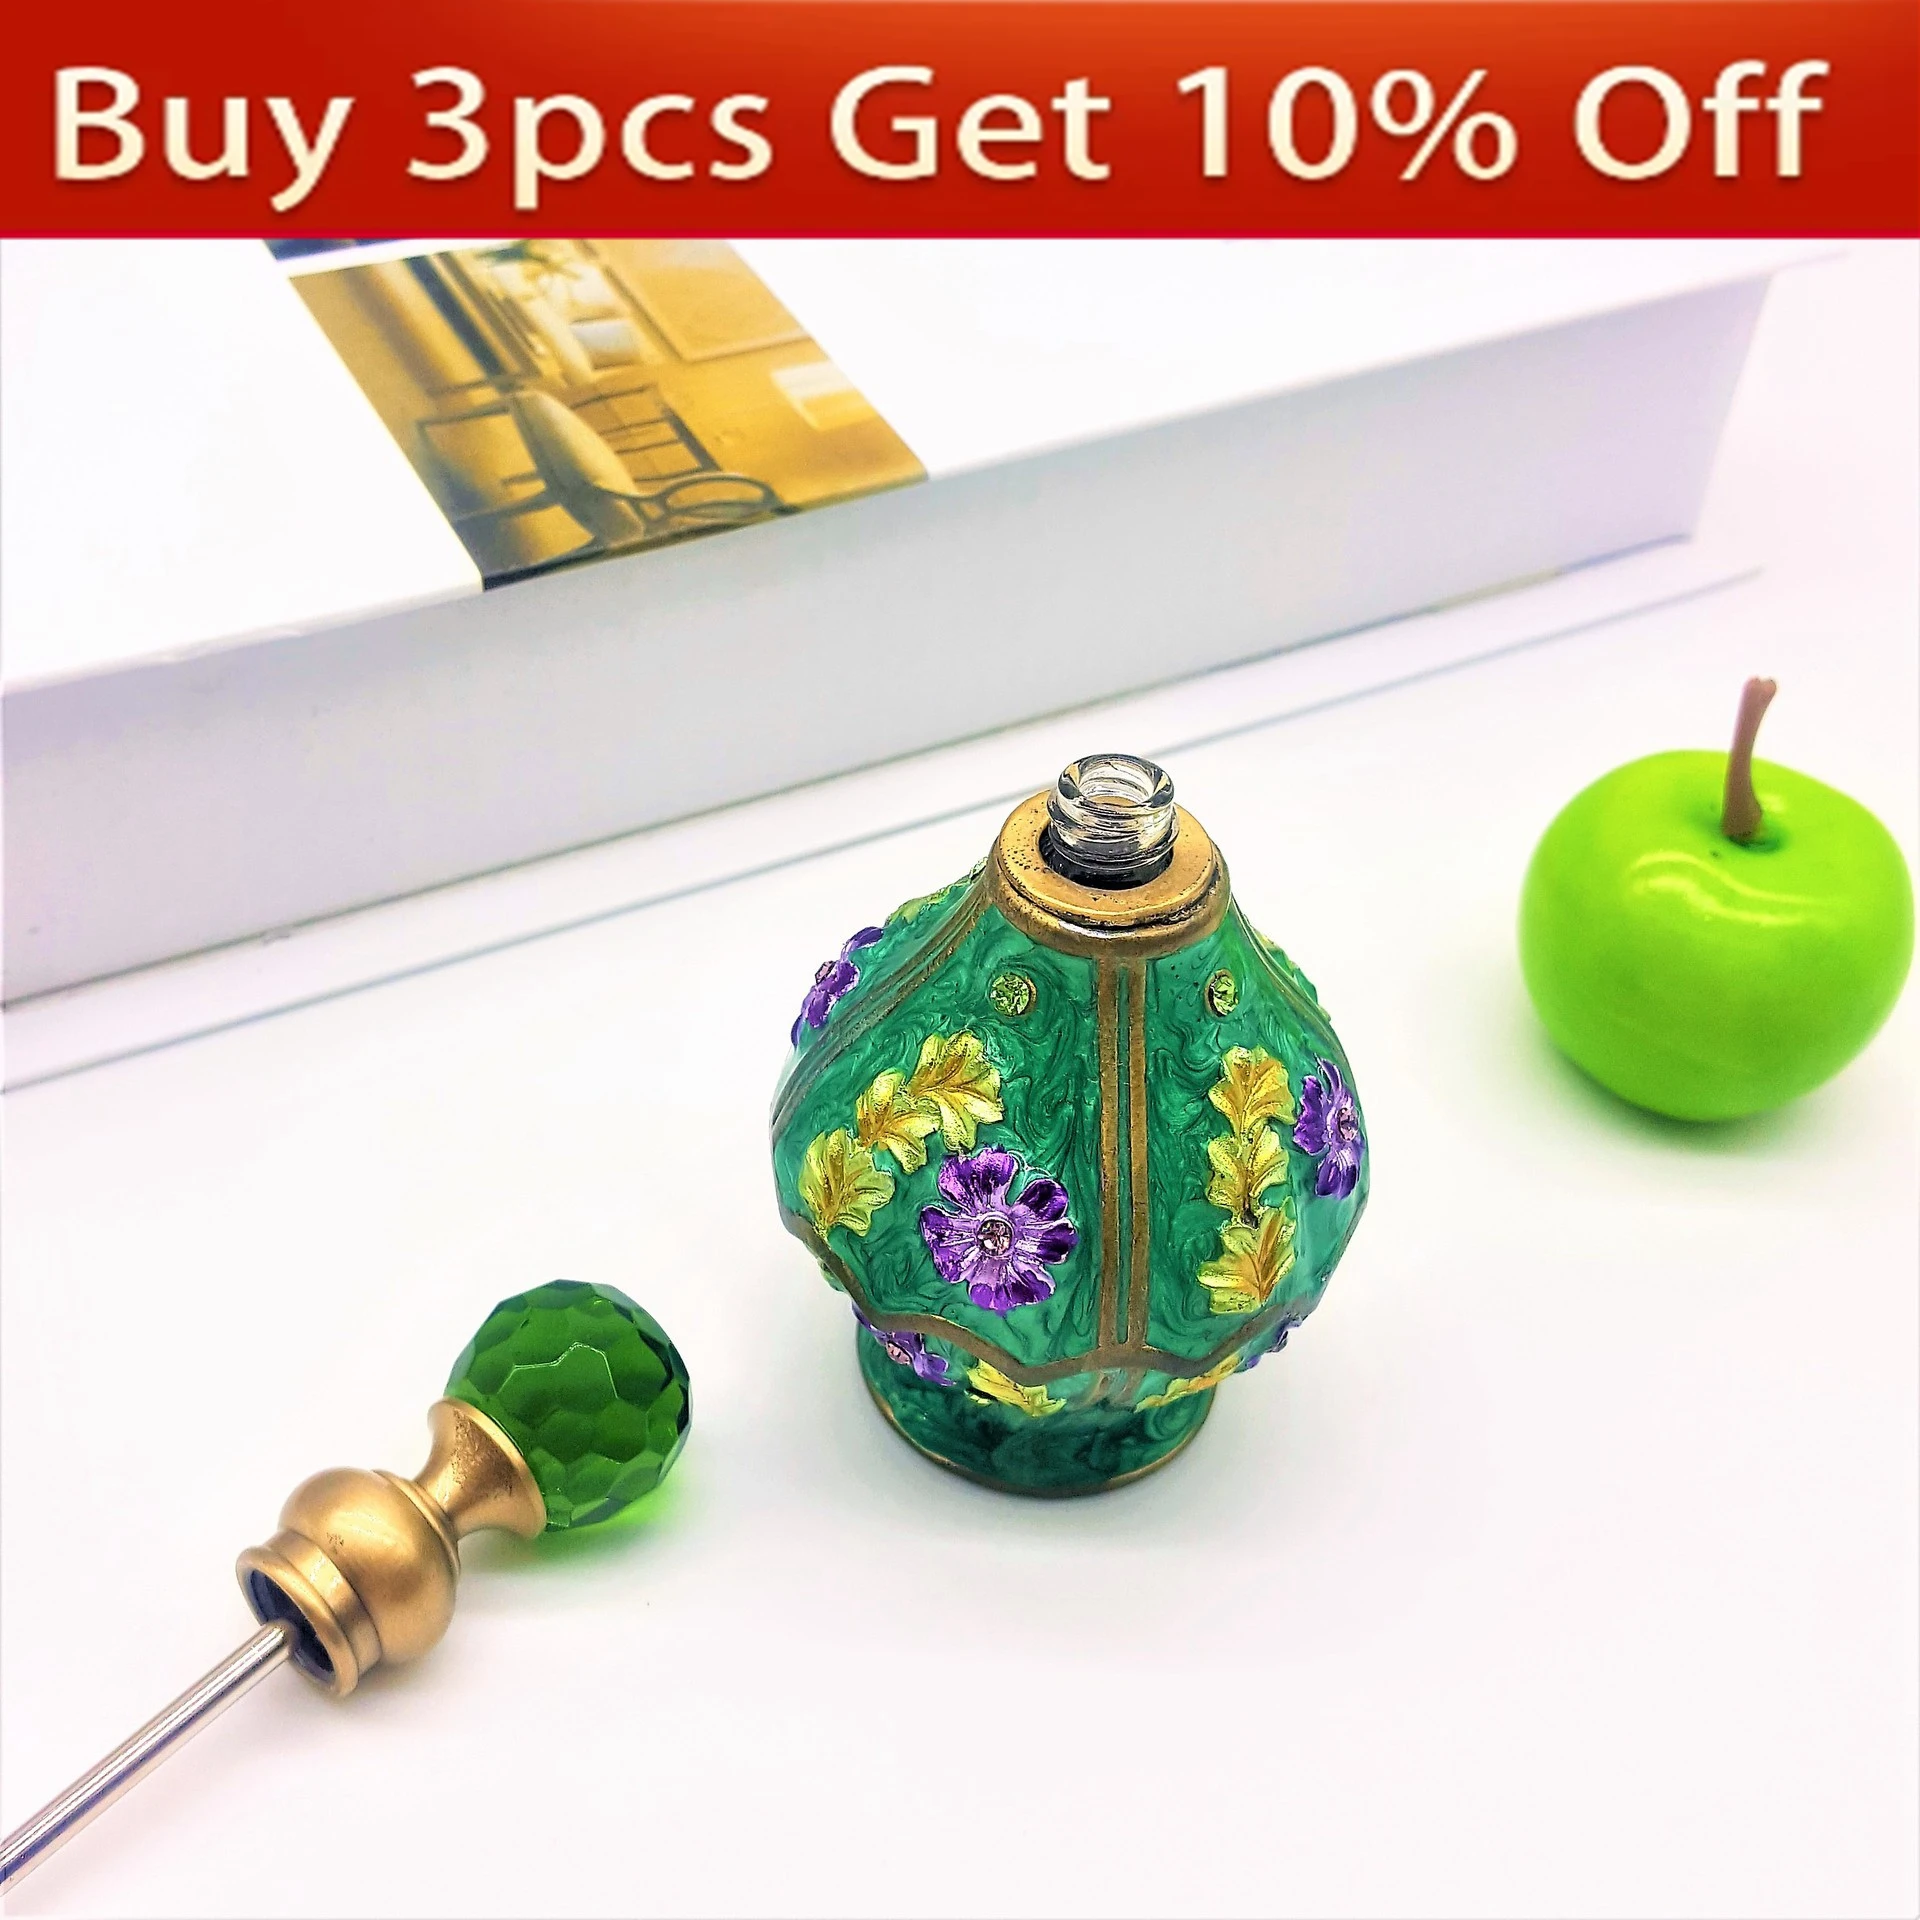 Dubai luxury enamelled alloy perfume bottle with essential oils Arabian Middle Eastern style empty bottle middle eastern arabian hookah ktv complete chicha shisha accessory water pipe for smoking narghile full set luxury hookah